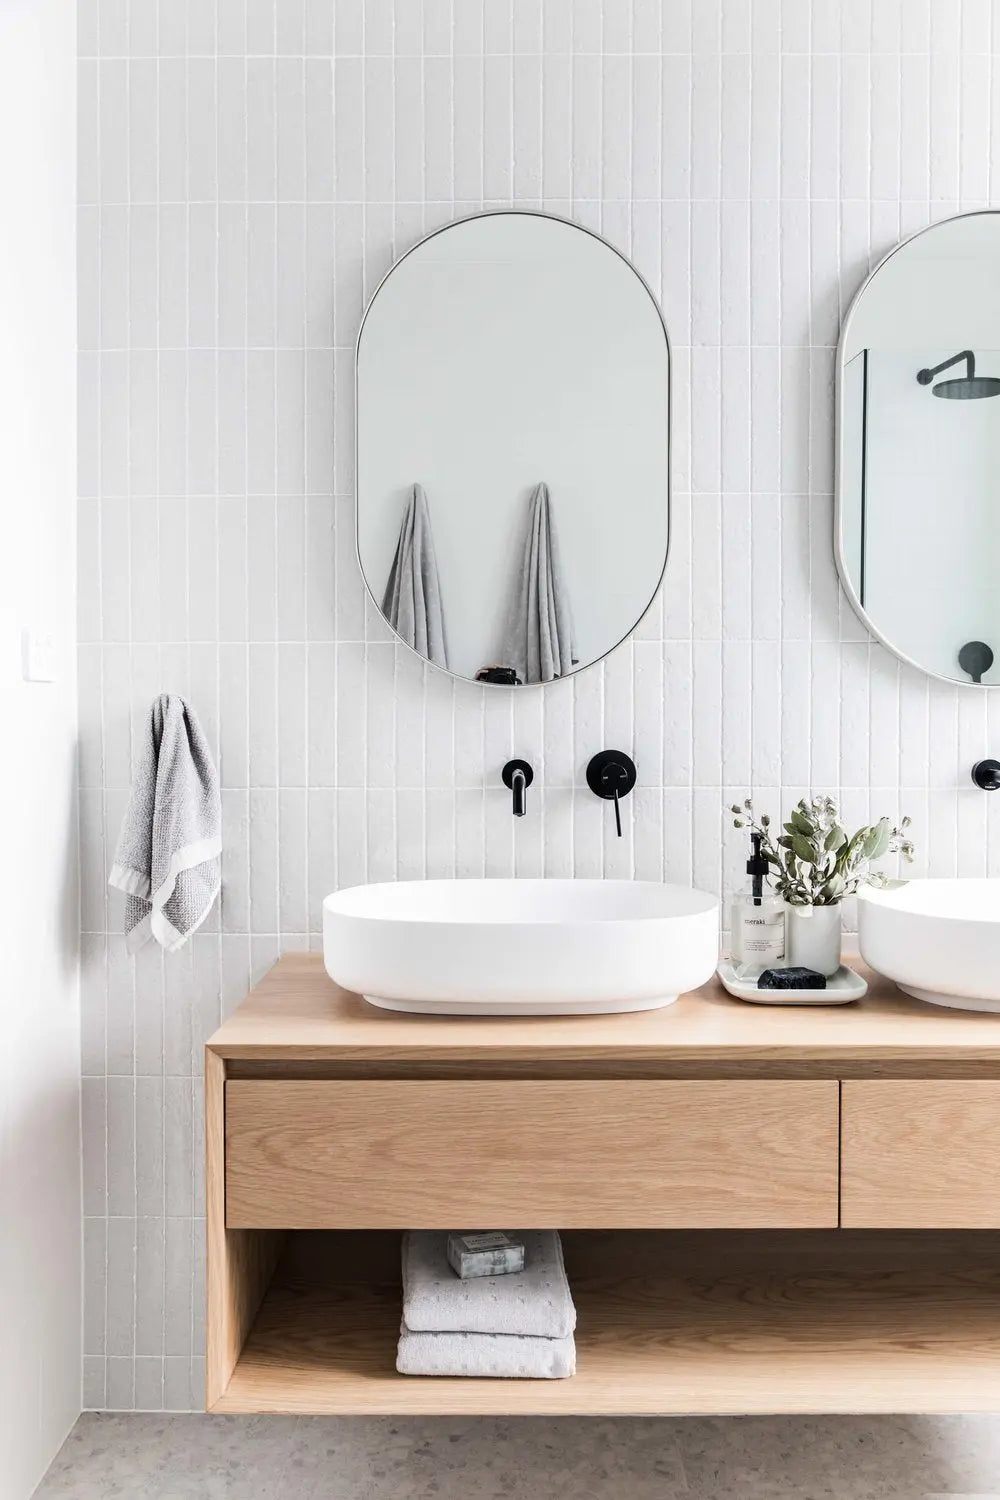 5 Bathroom Design Cheat Sheets: Simple Ways to Create a Modern, Traditional or Eclectic Look in Your Bathroom